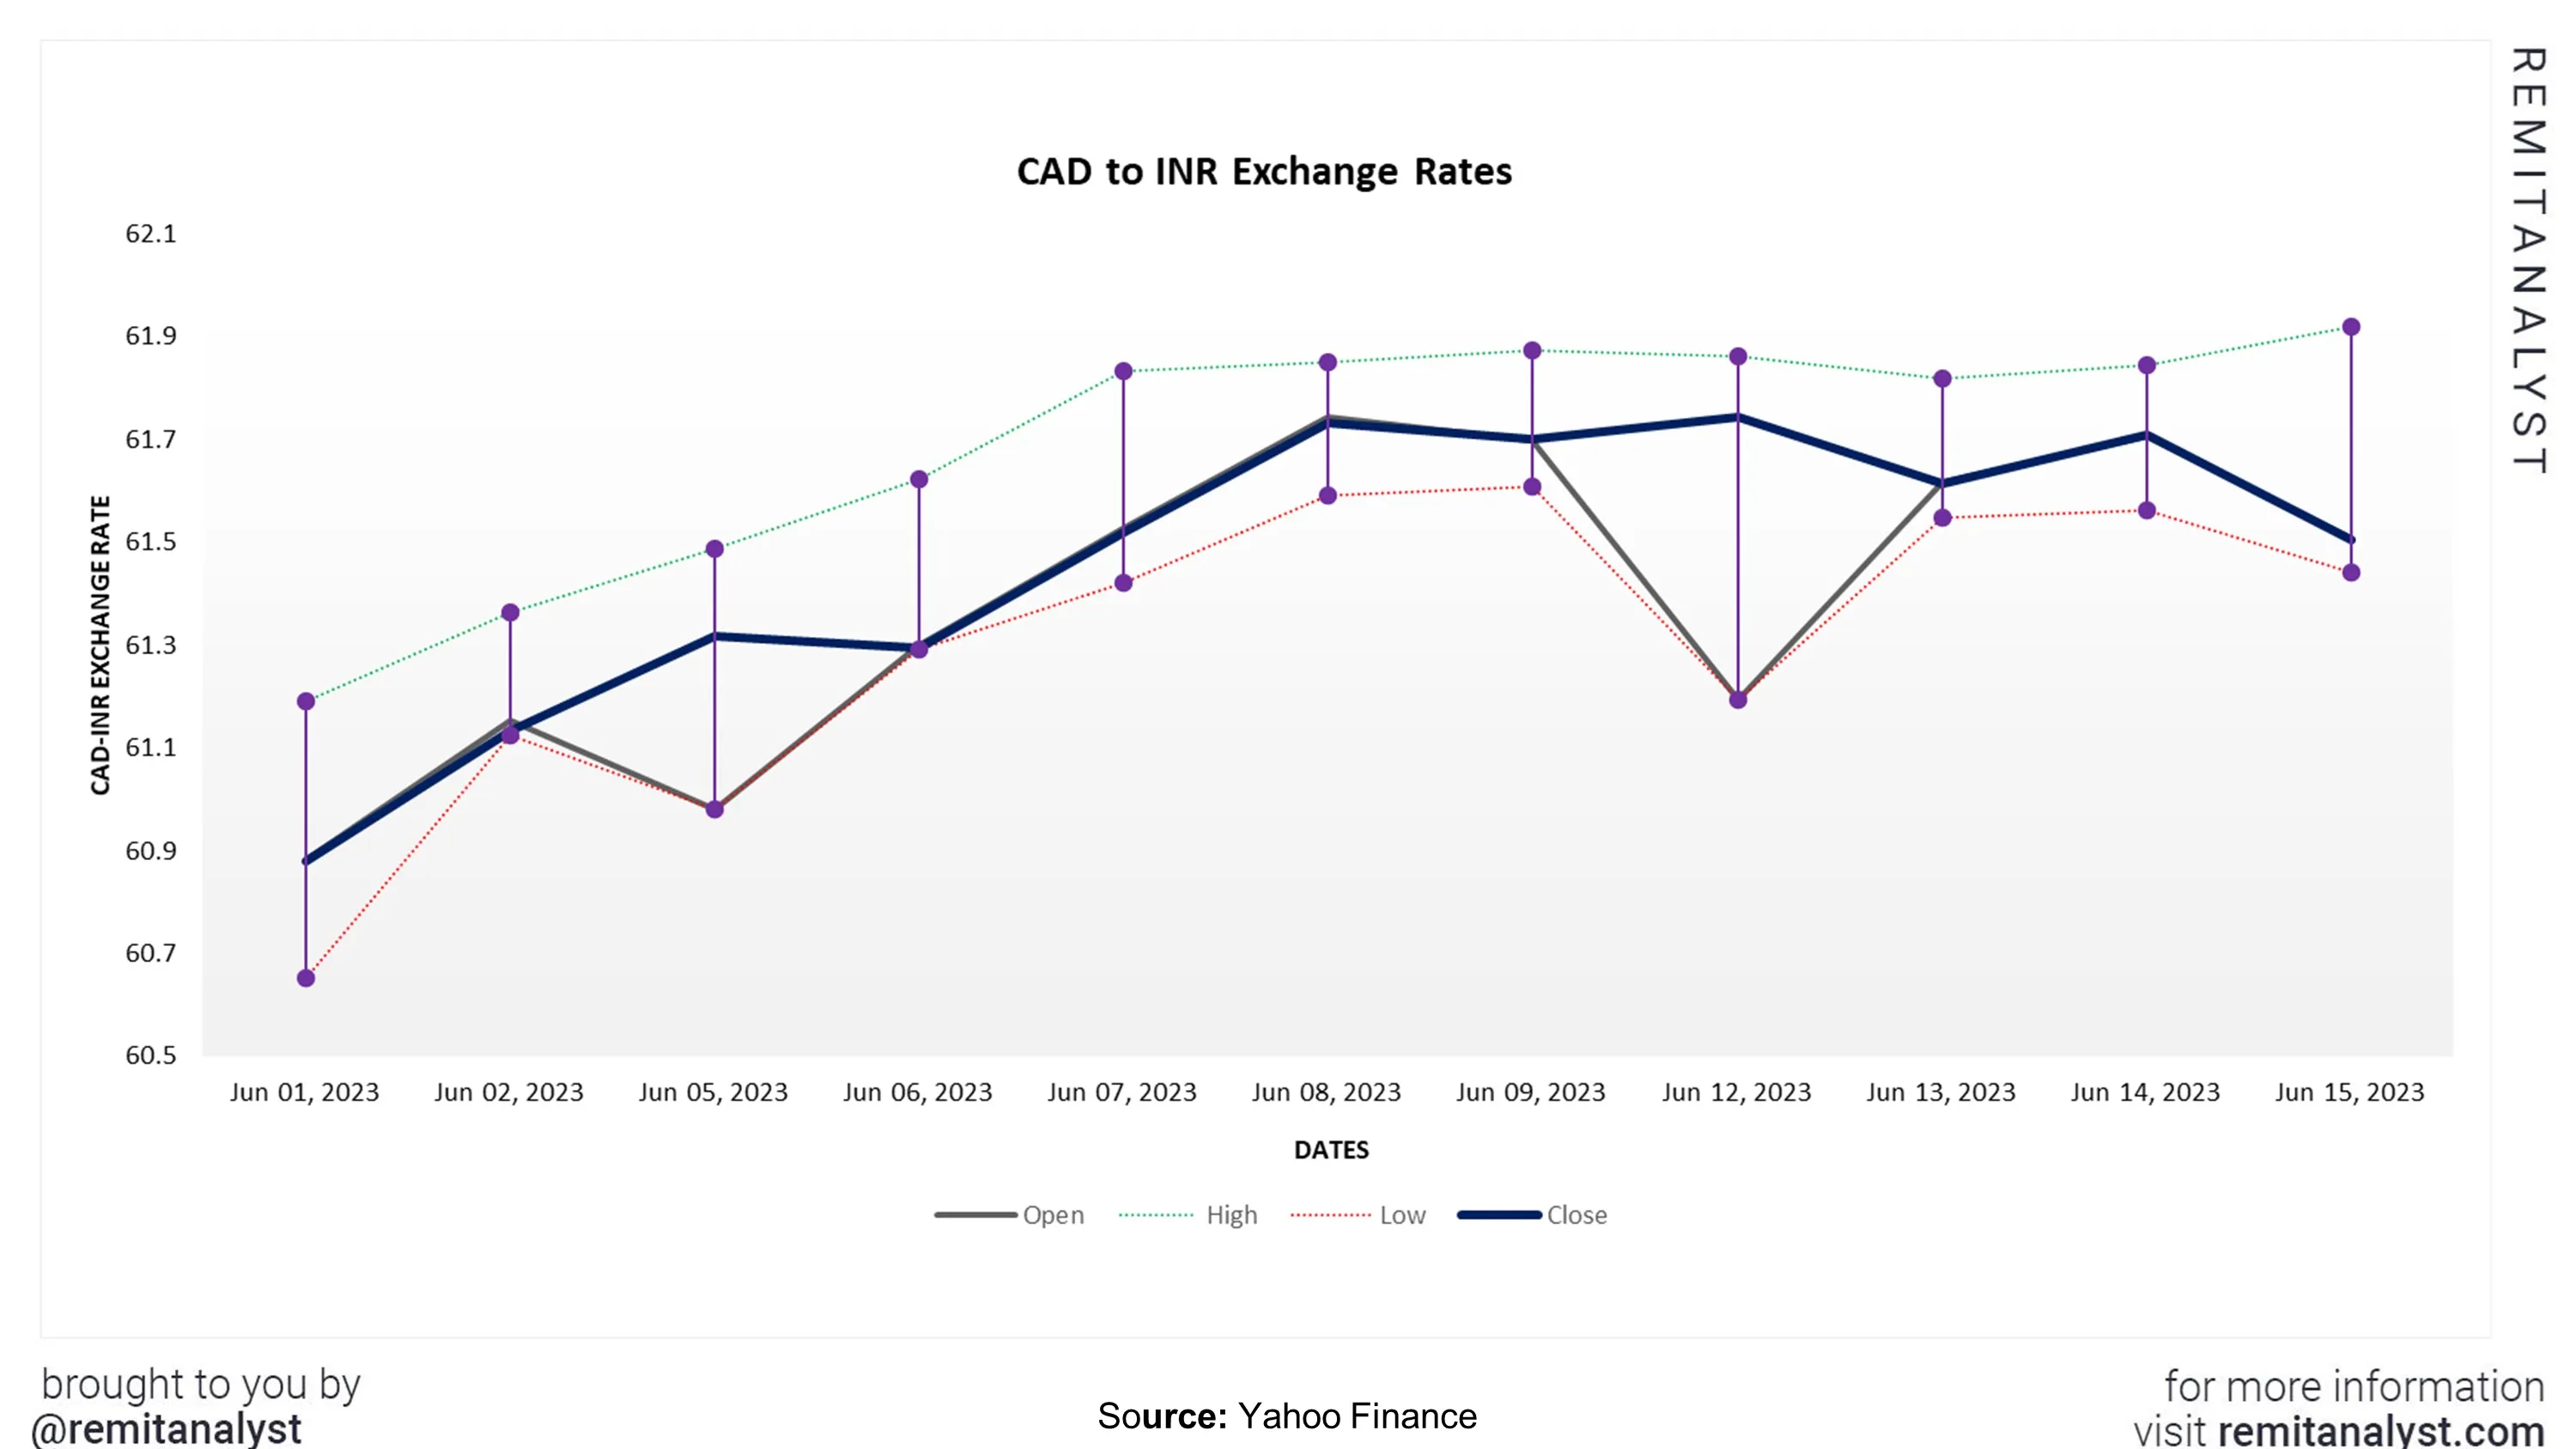 cad-to-inr-exchange-rate-from-1-june-2023-to-15-june-2023